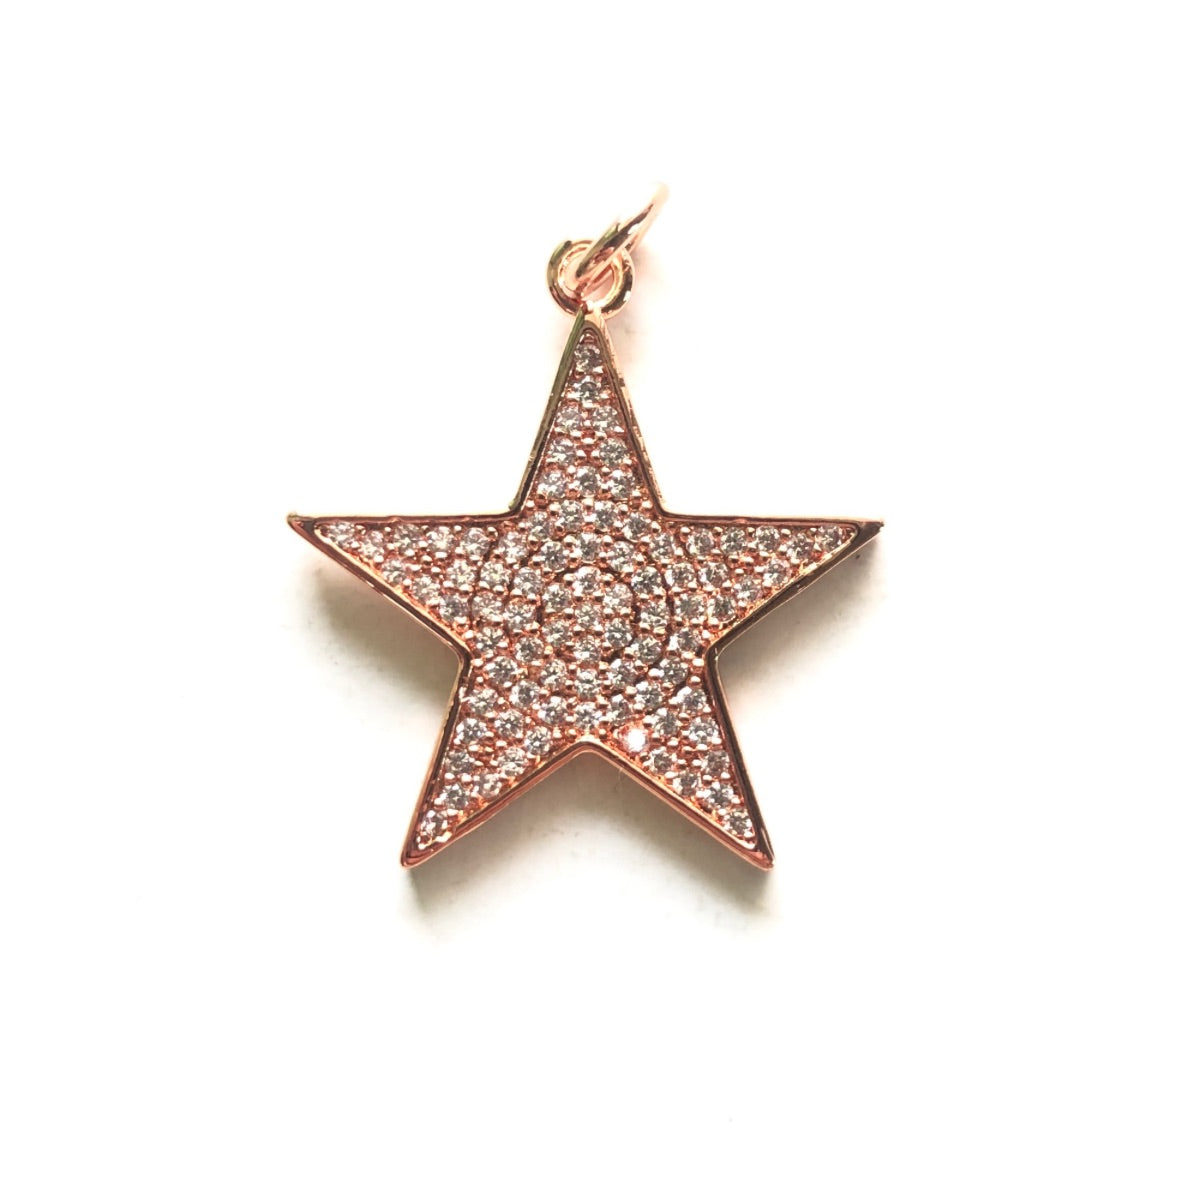 10pcs/lot 26.5*24.5mm CZ Paved Star Charms Rose Gold CZ Paved Charms New Charms Arrivals Sun Moon Stars Charms Beads Beyond